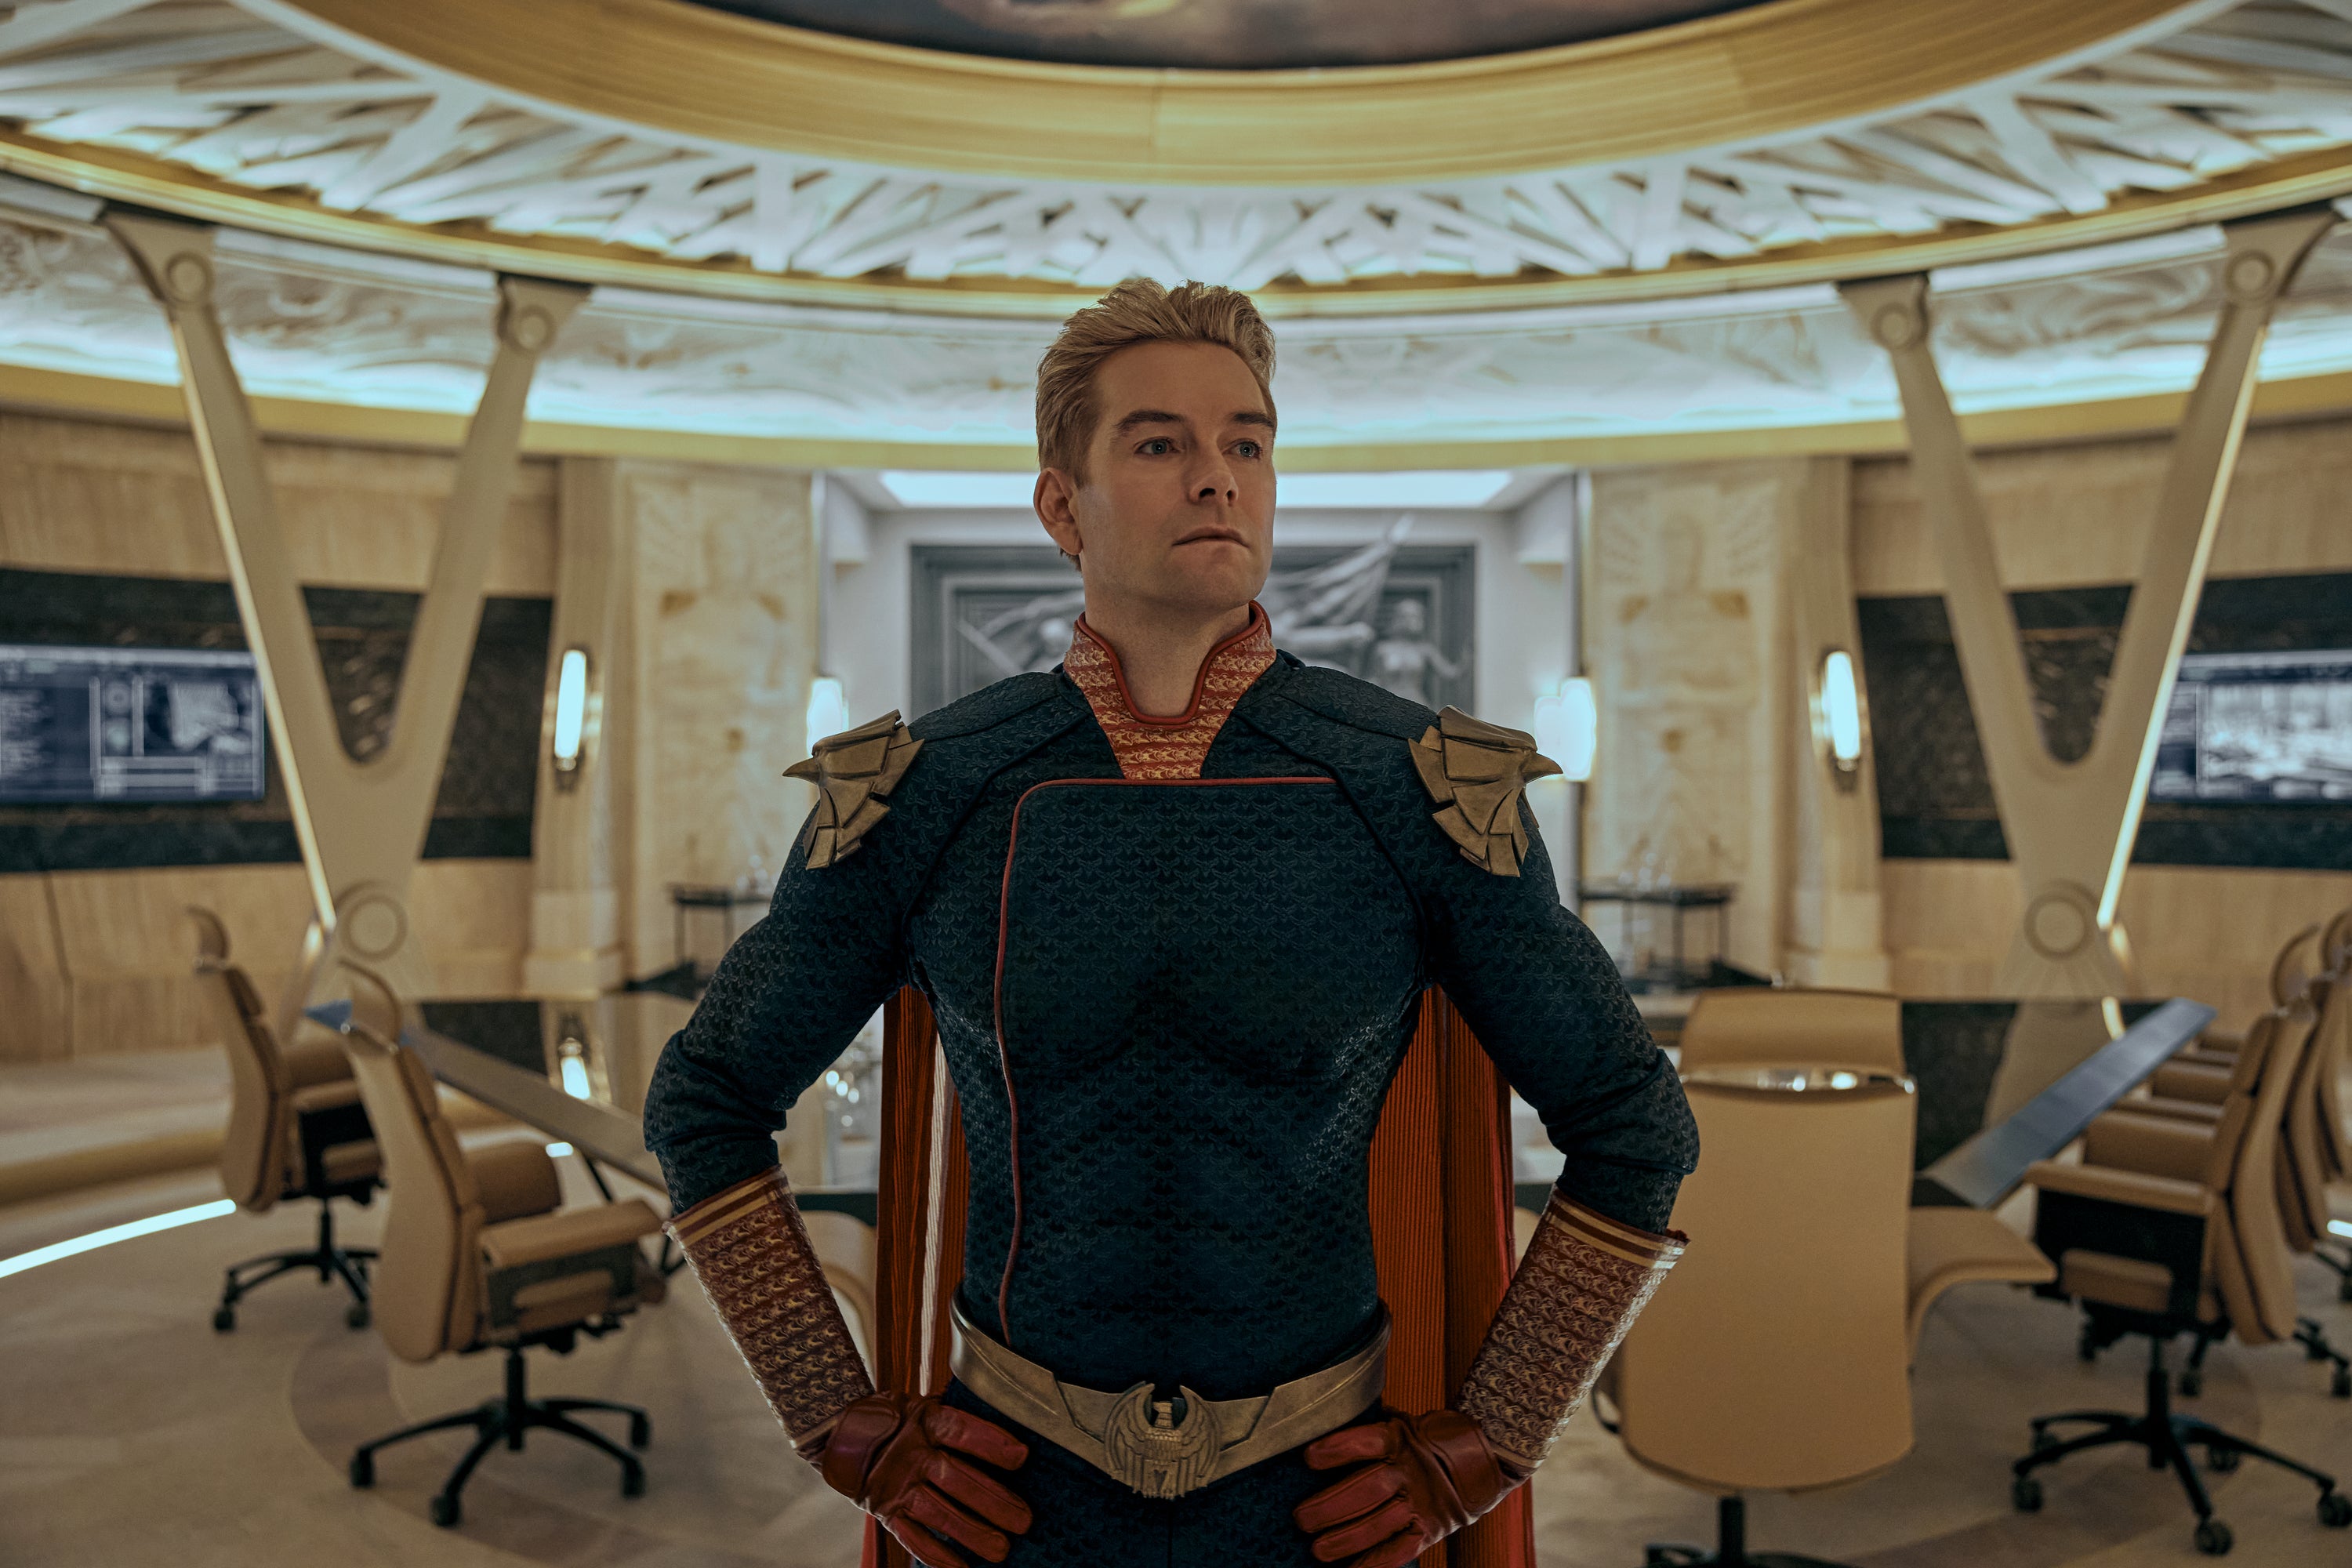 A superhero in a red white and blue costume stands in an ornate conference room, hands on his hips.